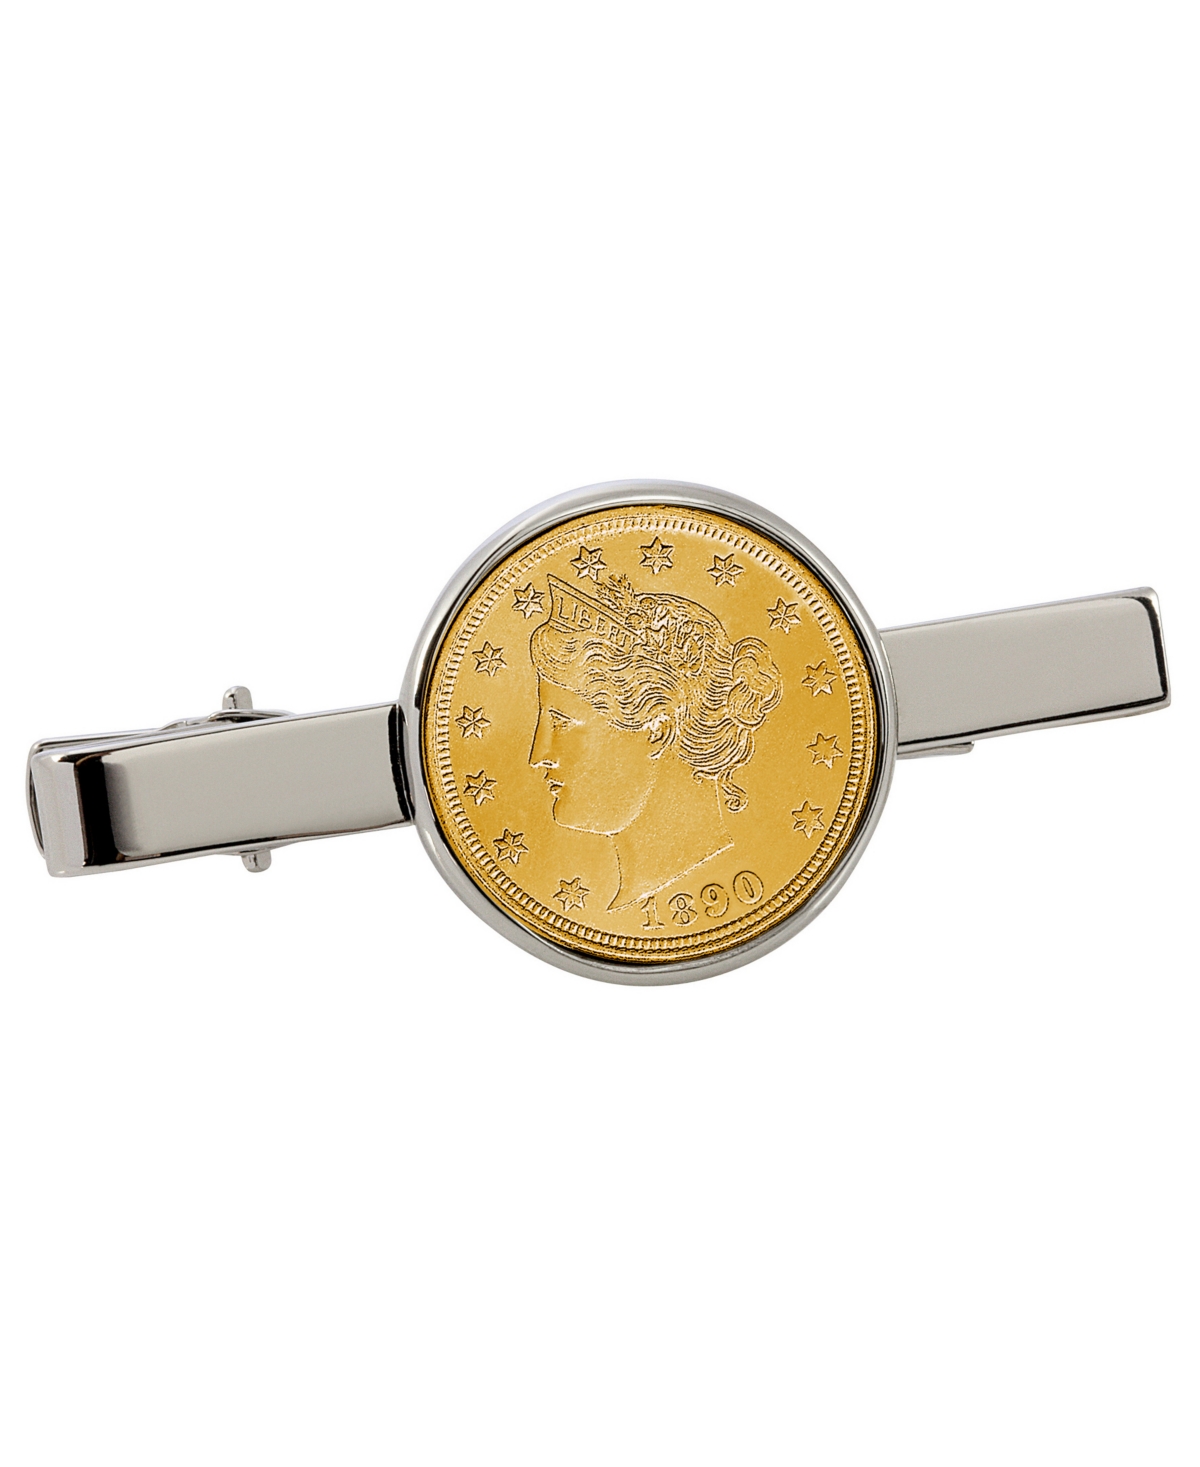 Gold-Layered Liberty Nickel Coin Tie Clip - Silver